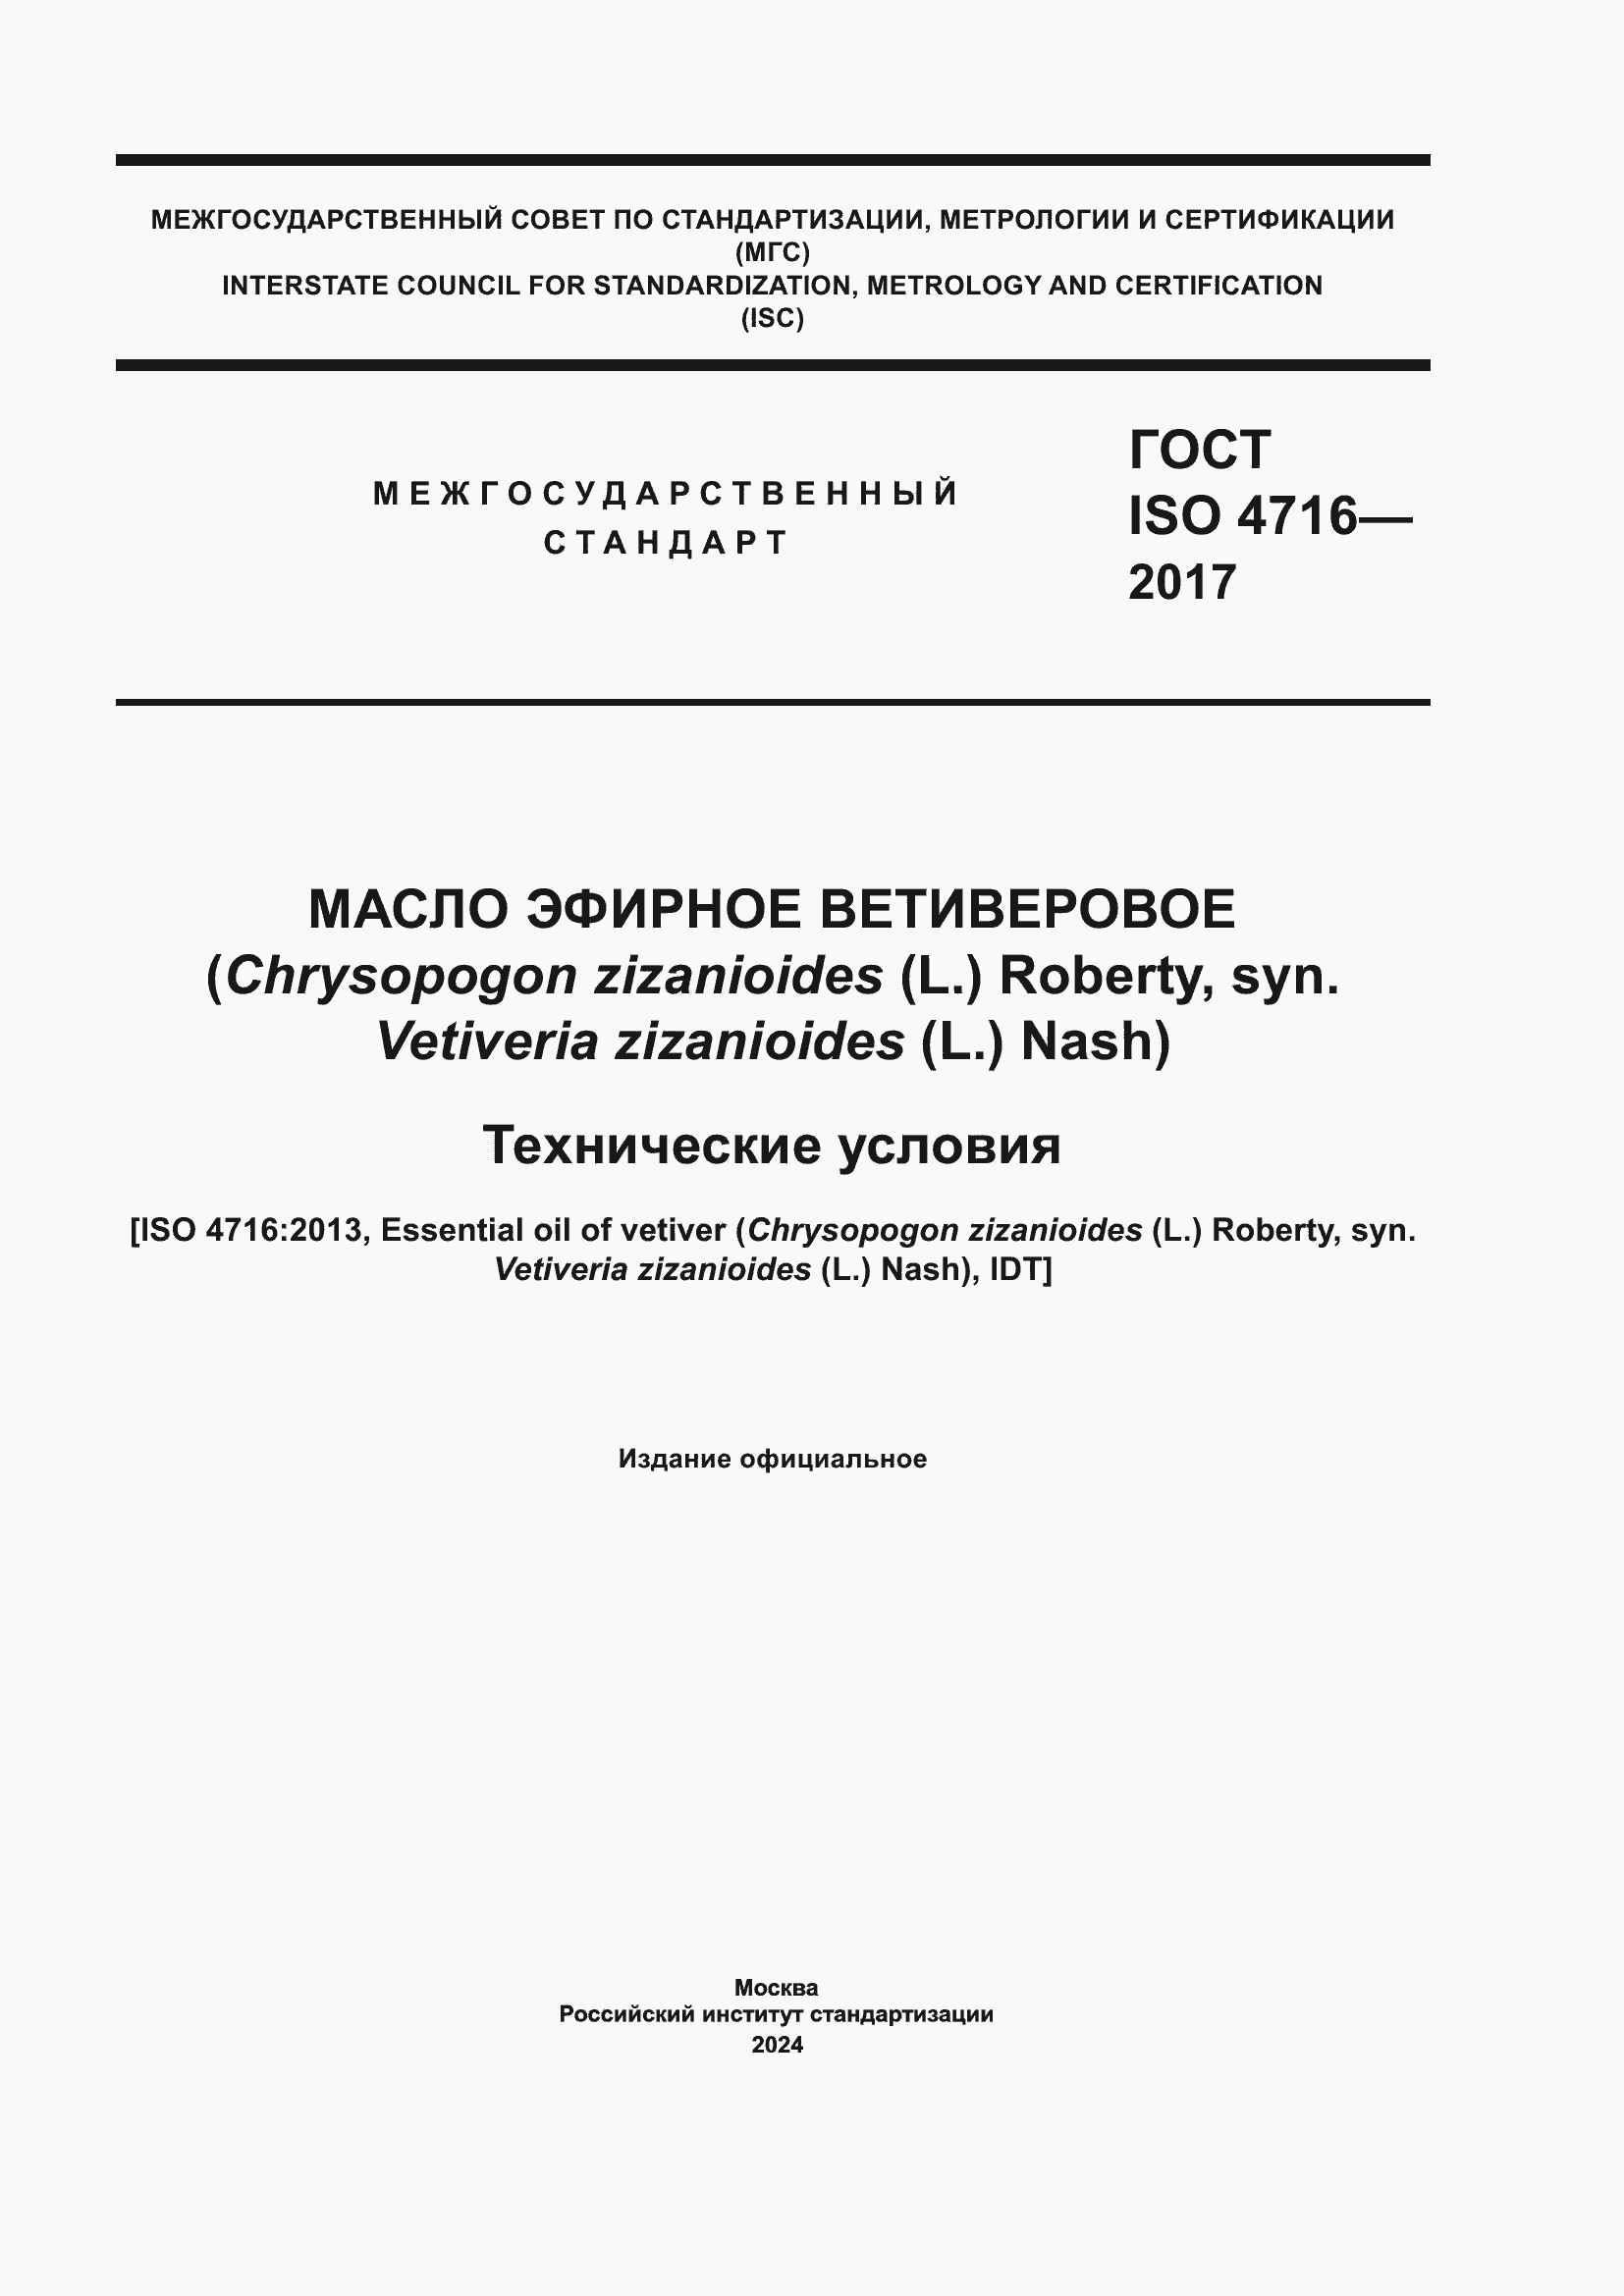  ISO 4716-2017.  1